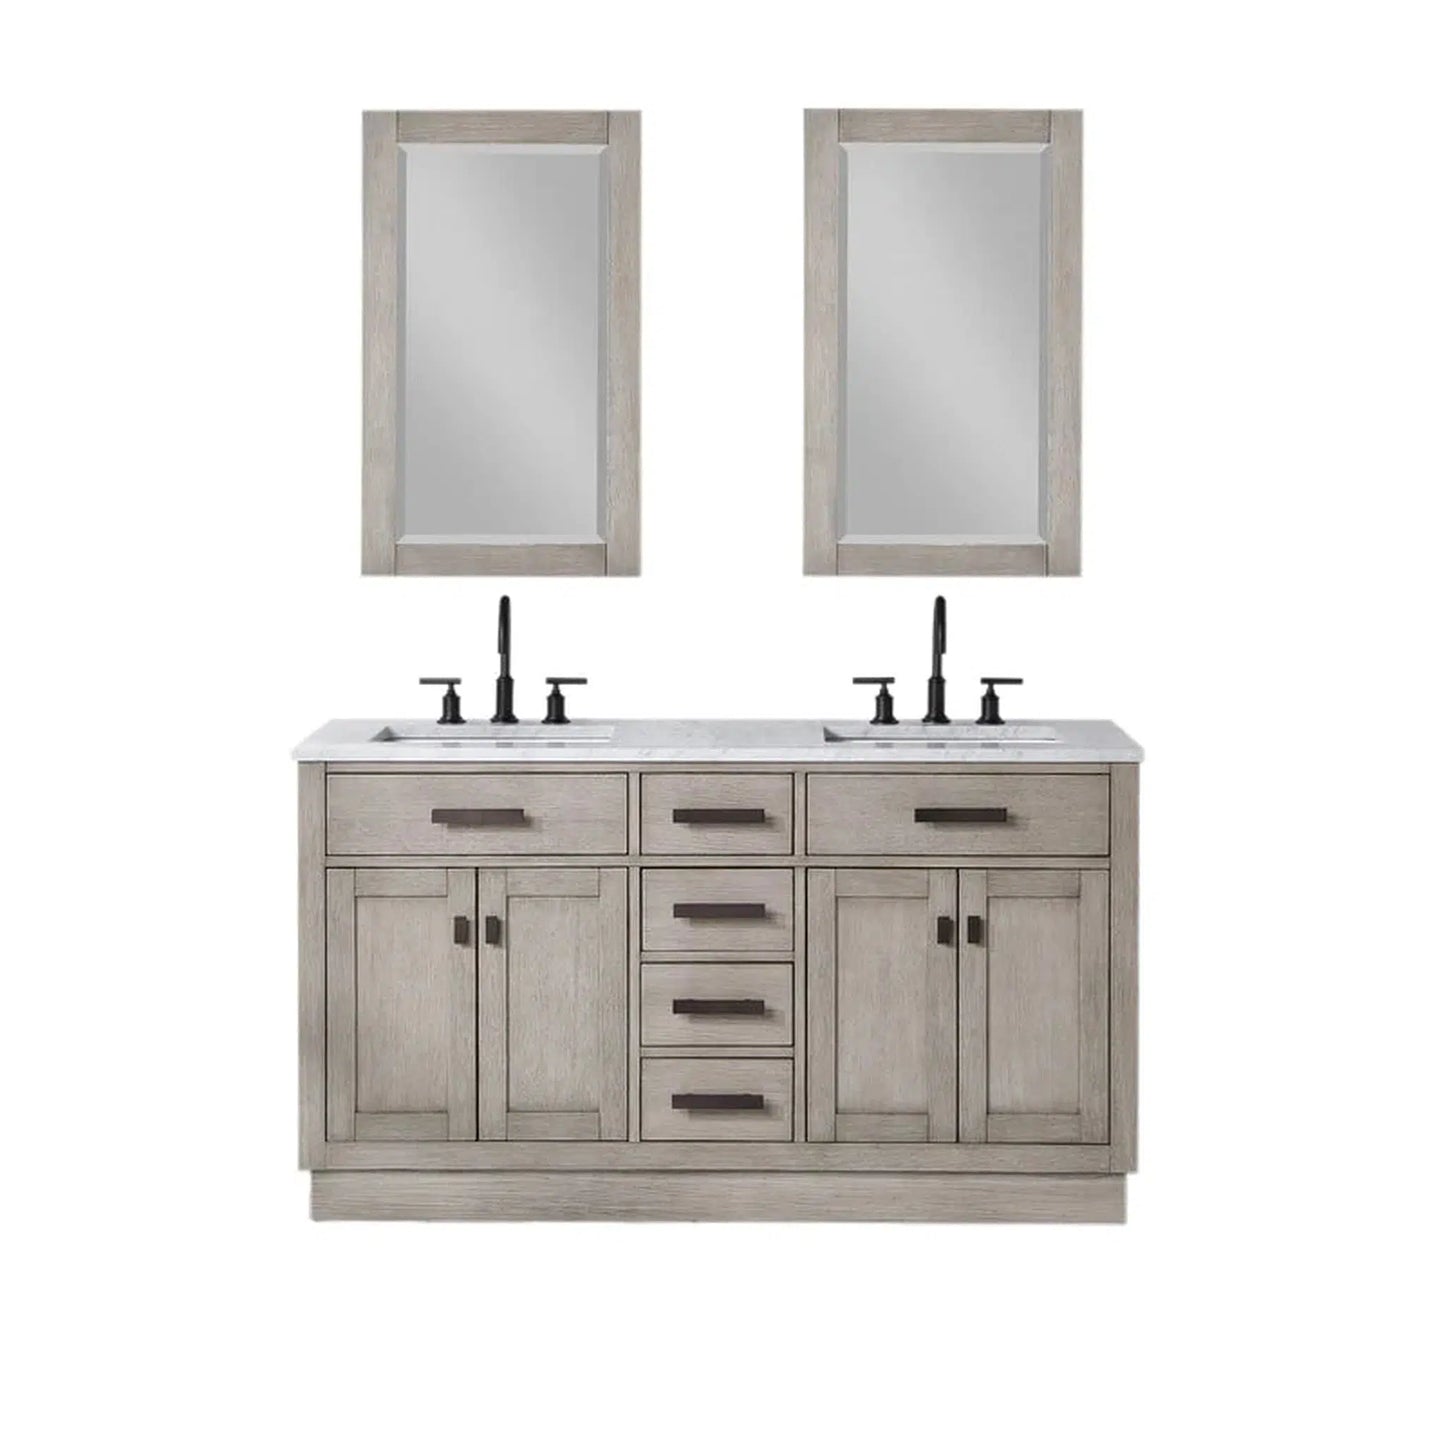 Water Creation Chestnut 60" Double Sink Carrara White Marble Countertop Vanity In Grey Oak with Grooseneck Faucets